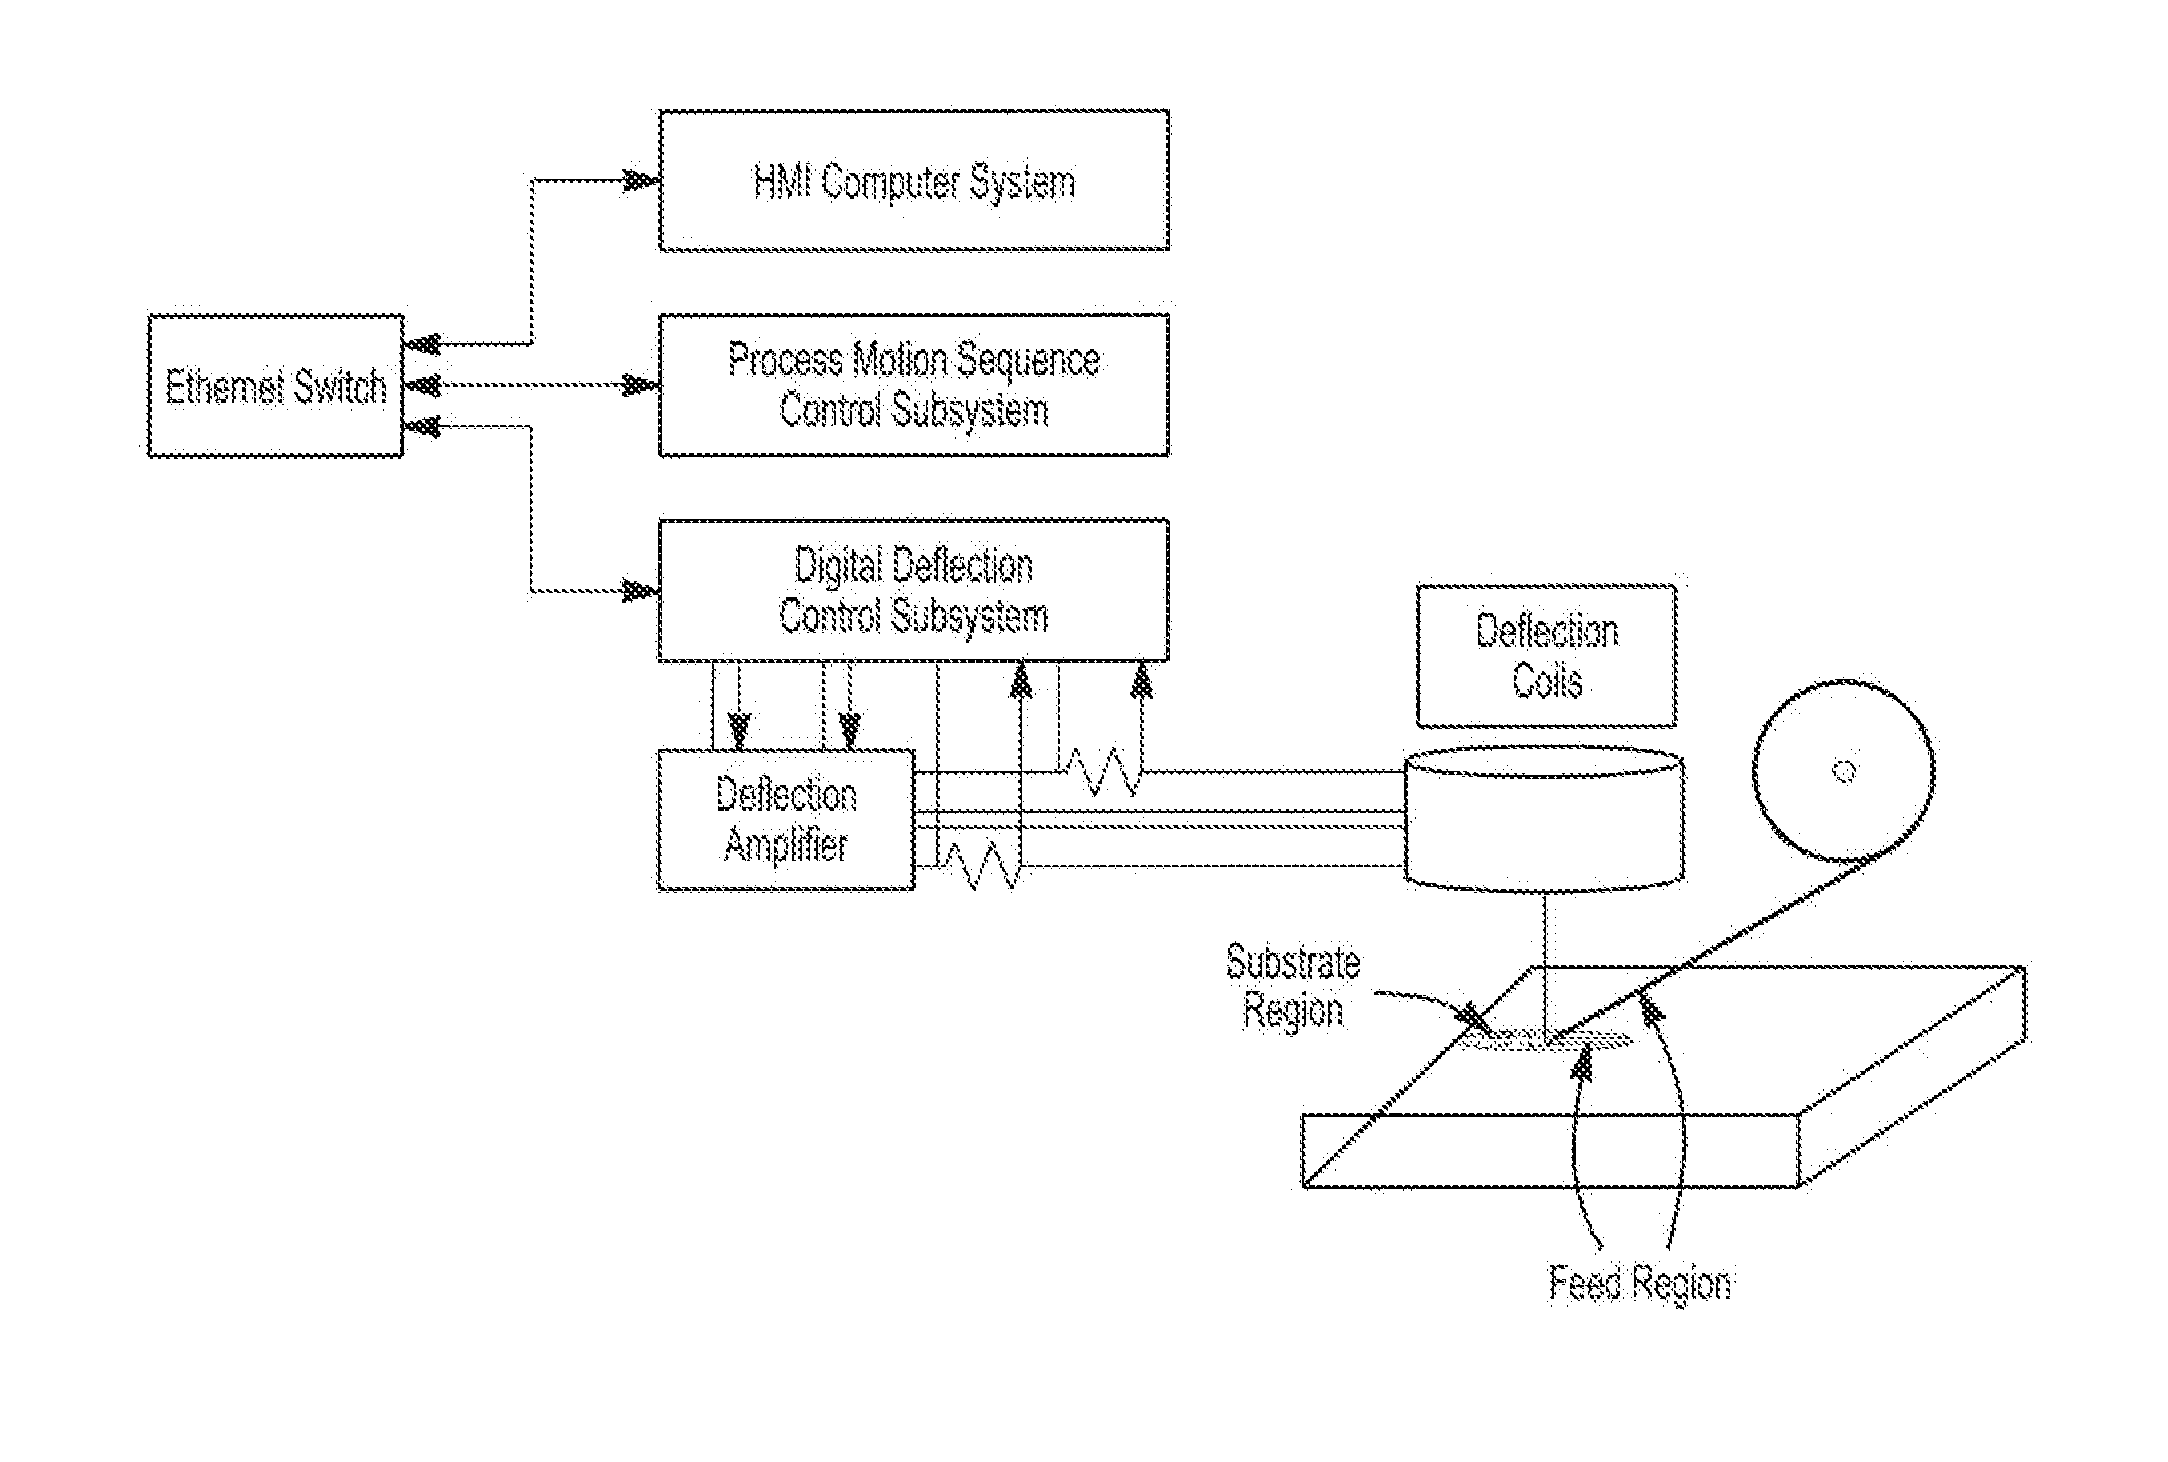 Raster methodology, apparatus and system for electron beam layer manufacturing using closed loop control